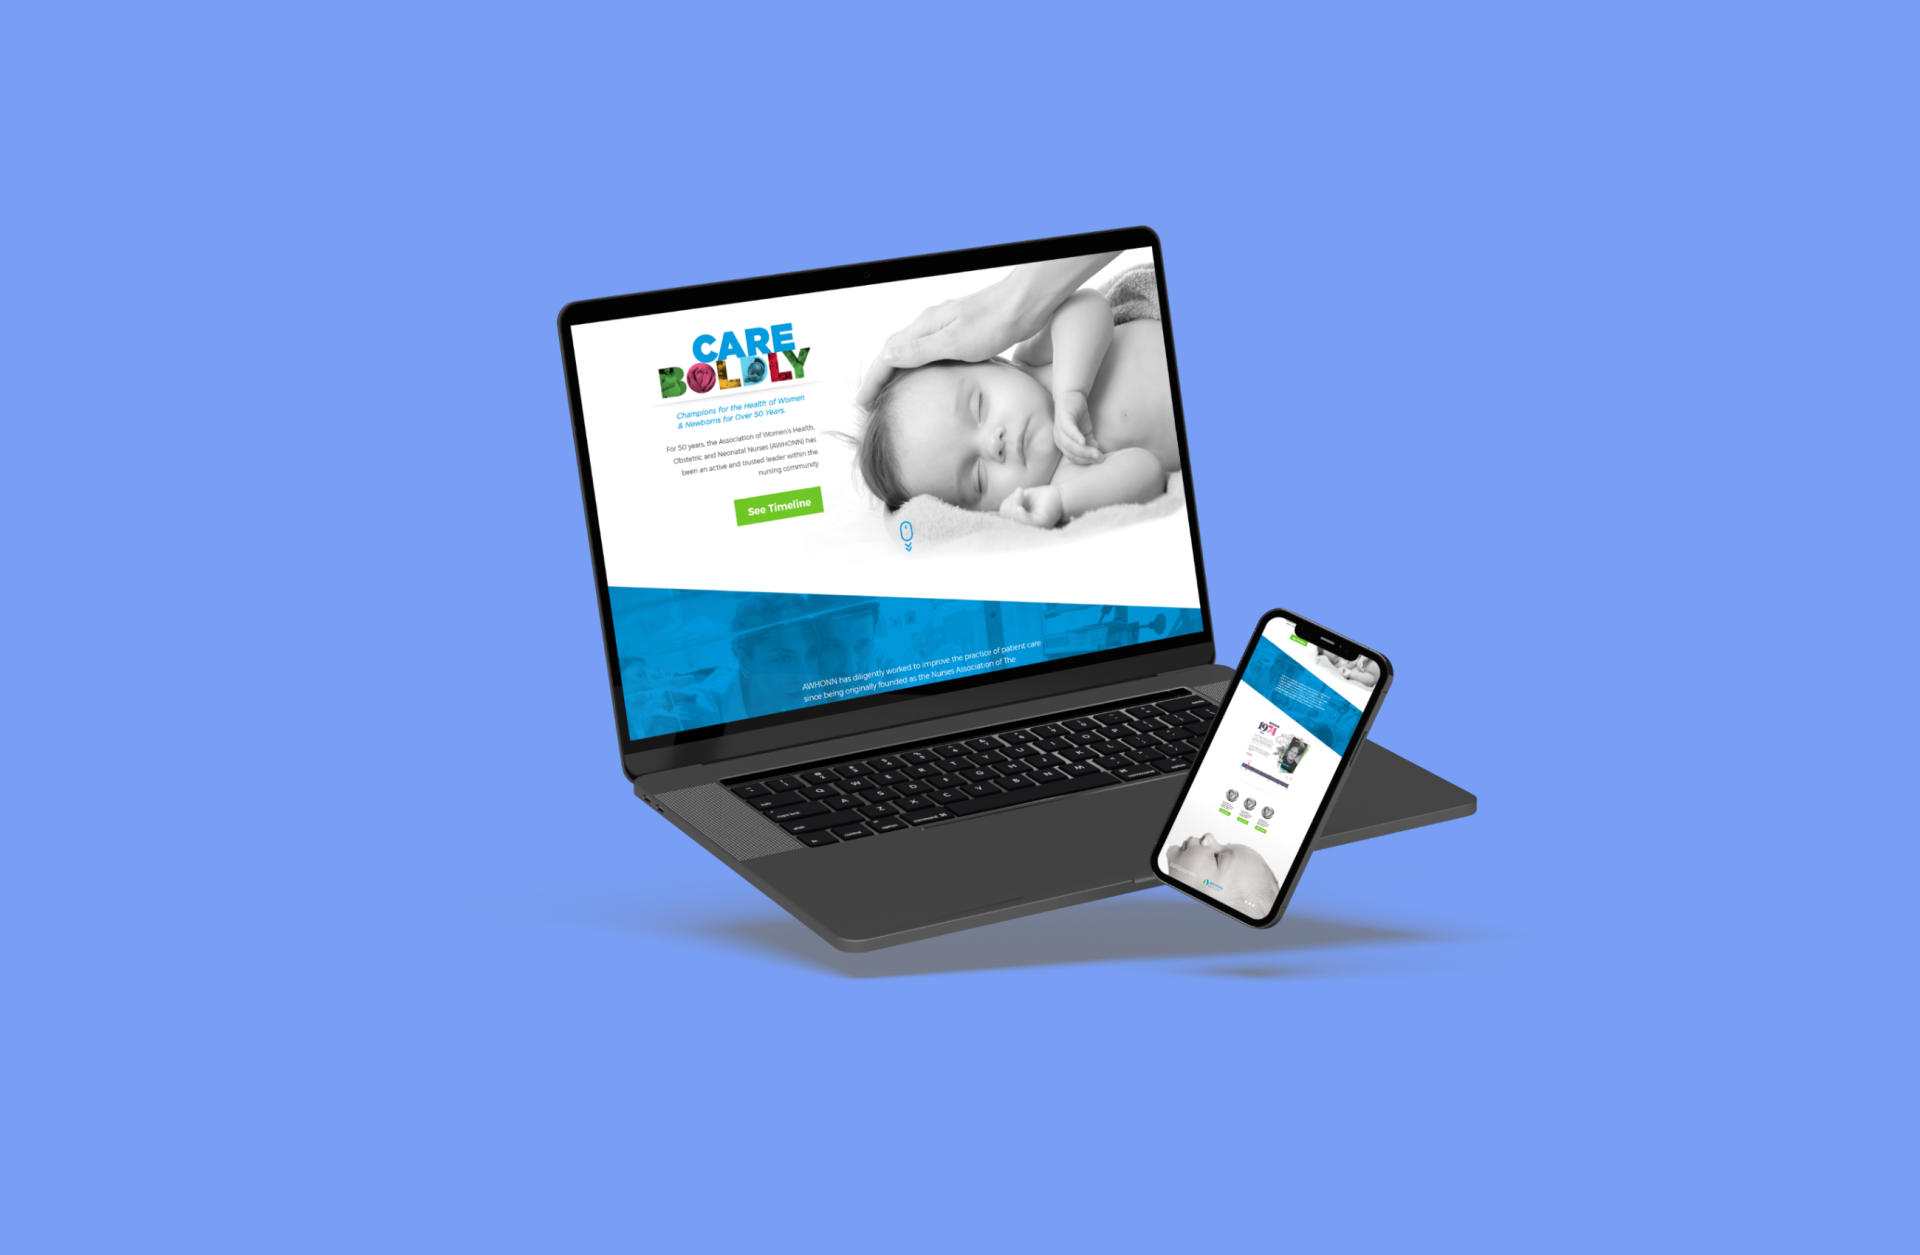 A laptop and a smartphone placed against a blue background, both displaying a baby care website with a calming image of a sleeping baby as part of the AWHONN 50th Anniversary campaign.